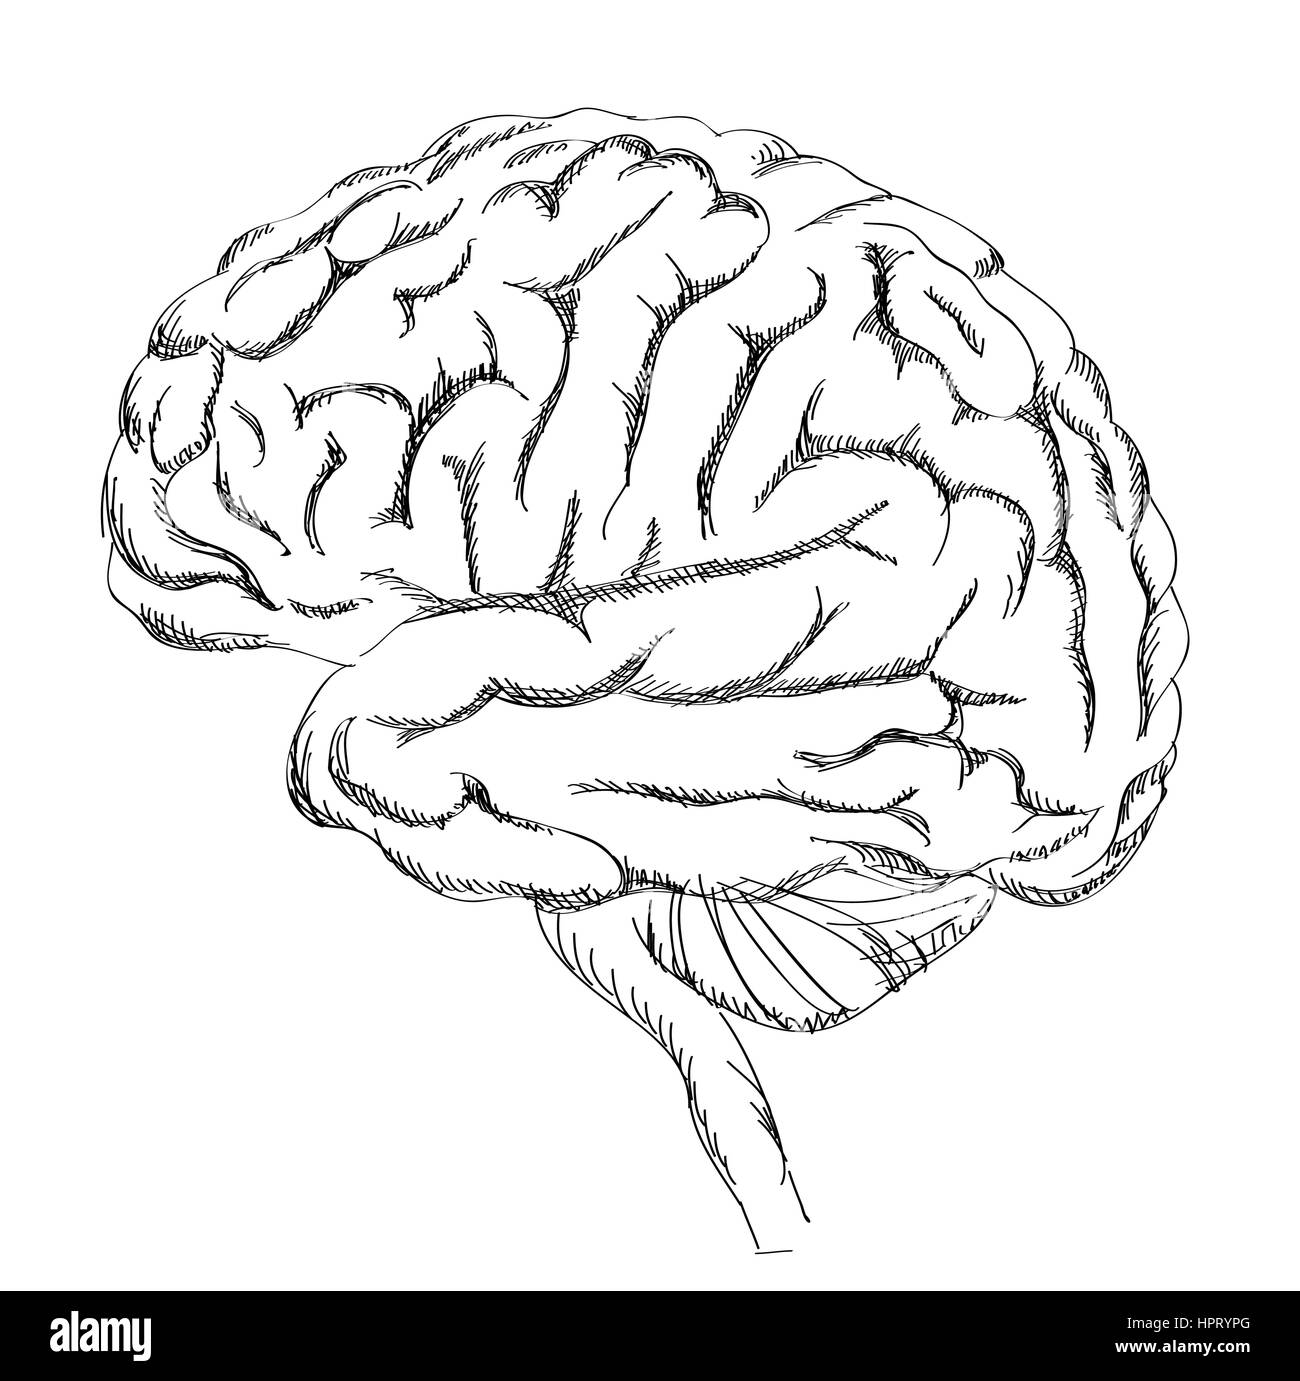 Brain anatomy. Human brain lateral view. Sketch illustration isolated on white background. Stock Vector